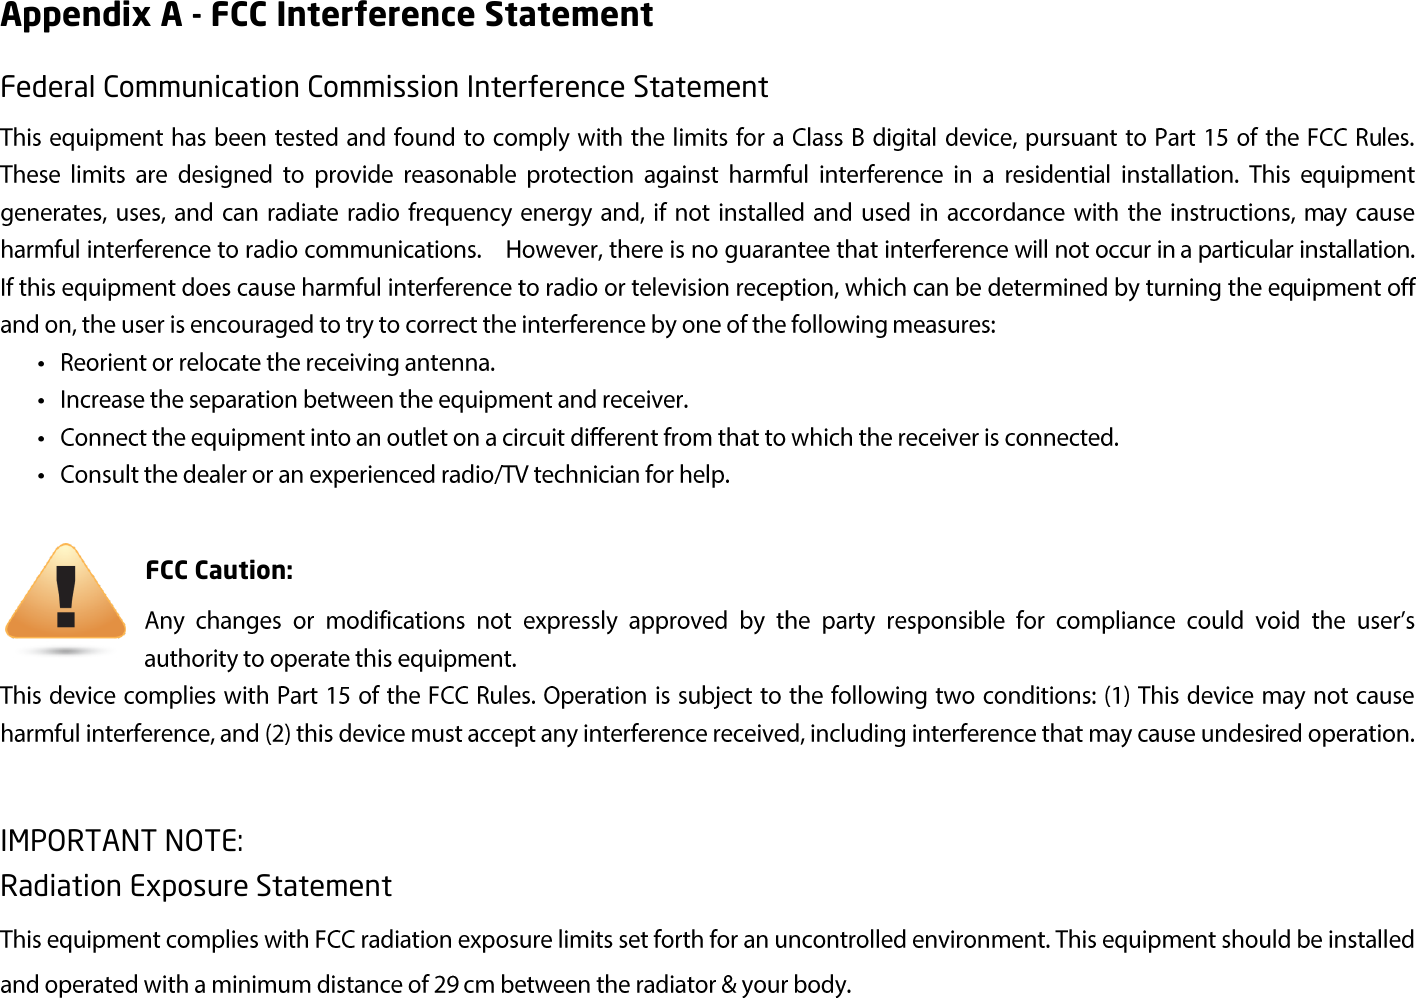 Appendix A - FCC Interference Statement Federal Communication Commission Interference Statement FCC Caution: IMPORTANT NOTE: Radiation Exposure Statement  